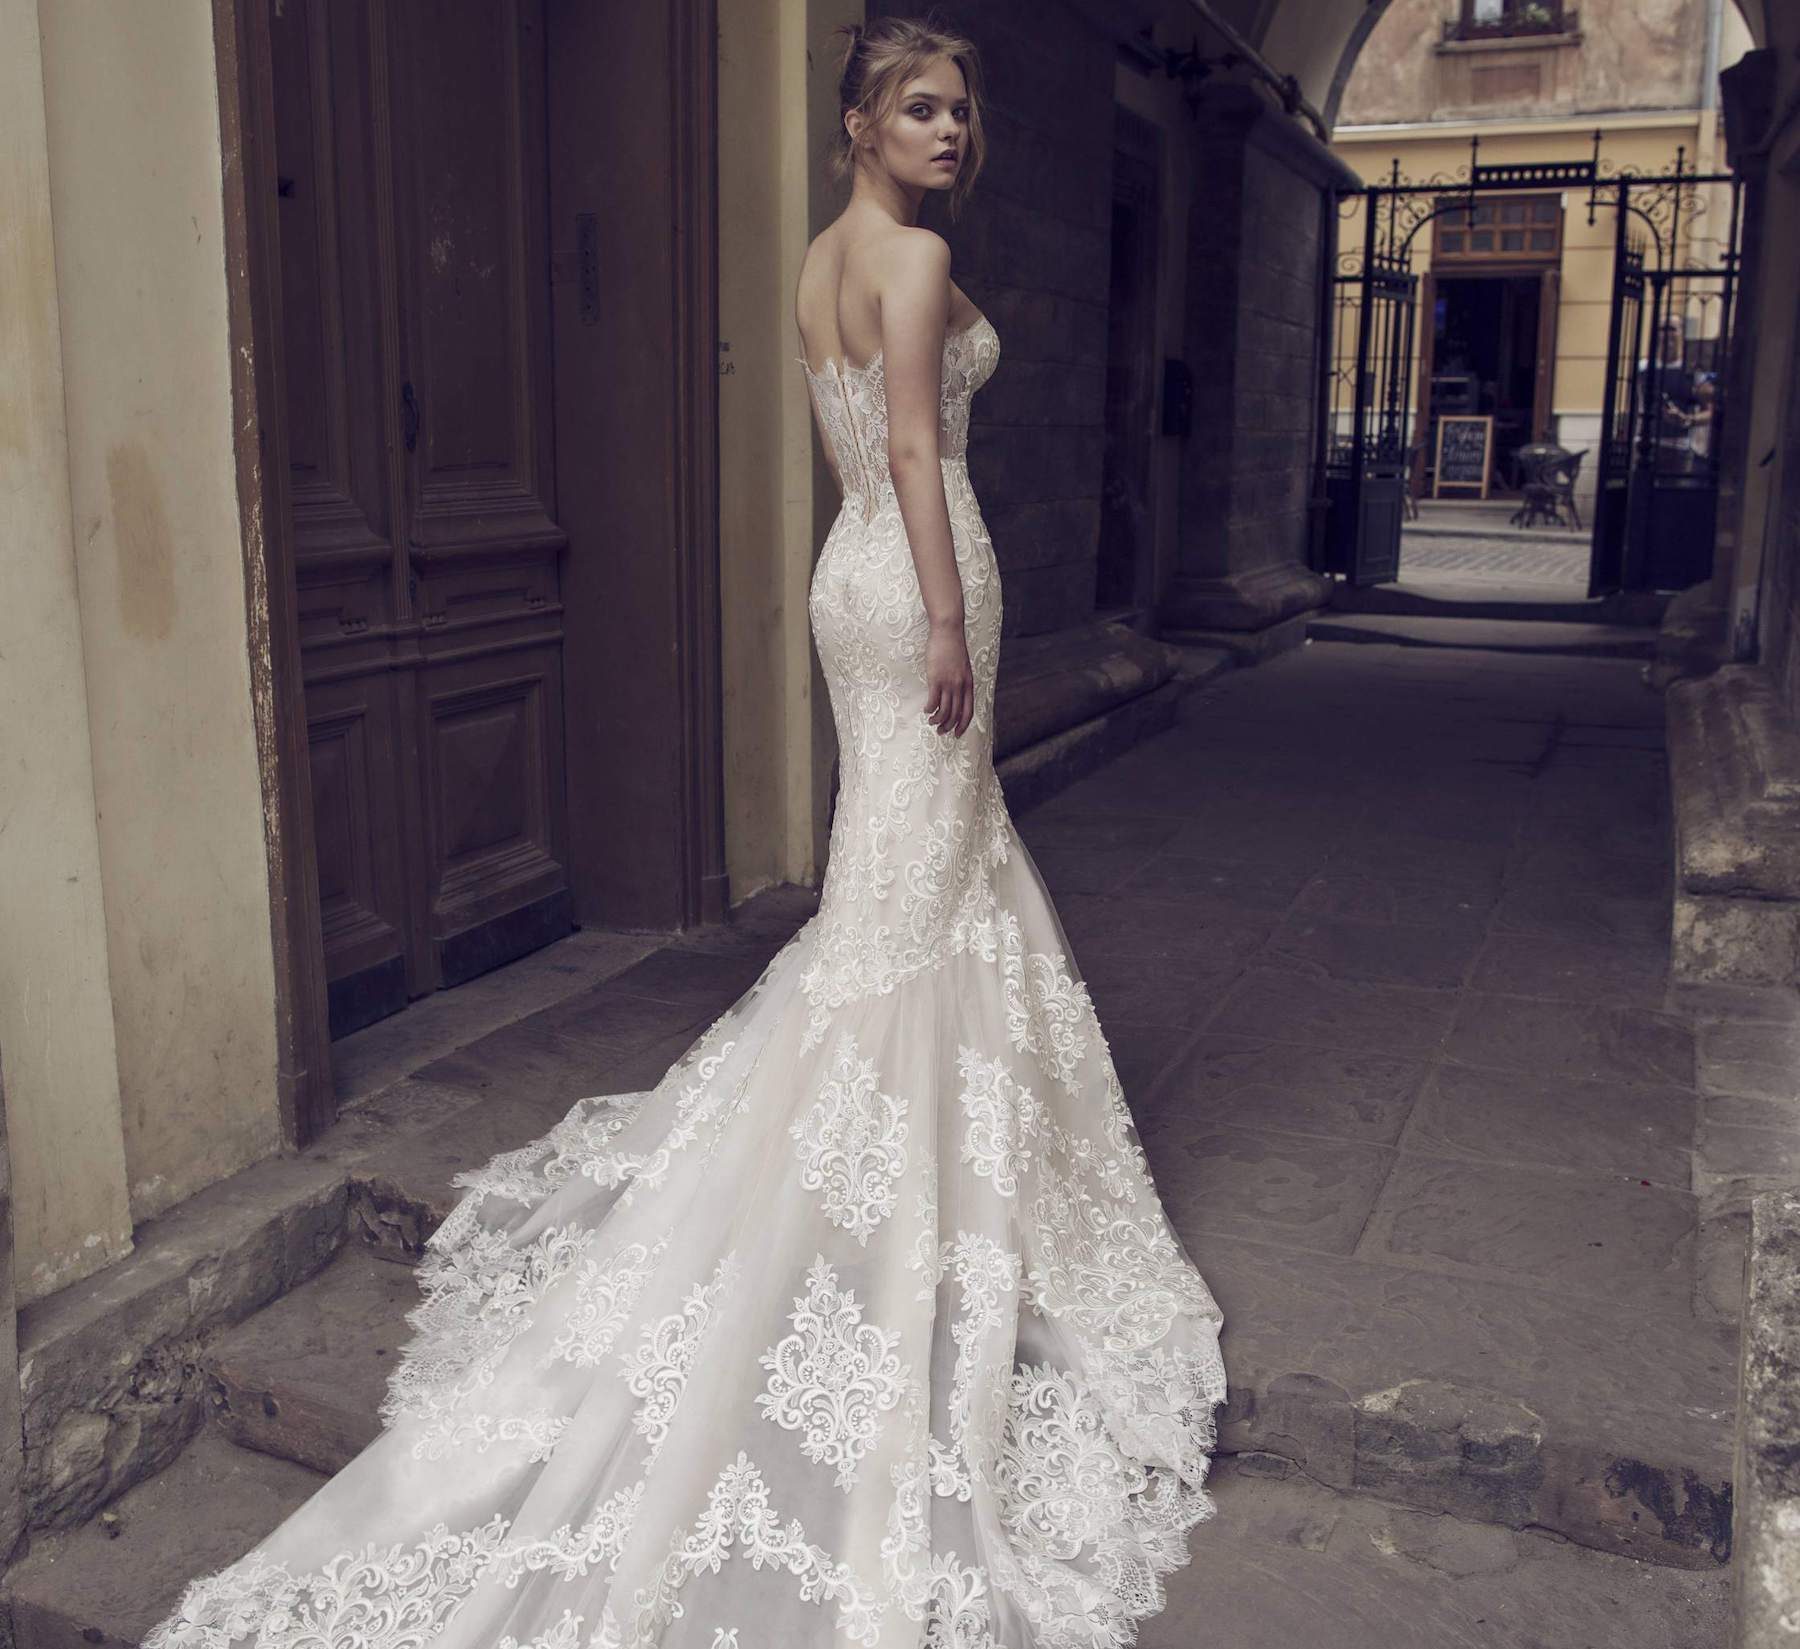 wedding dresses Archives - Page 17 of 44 - Belle The Magazine